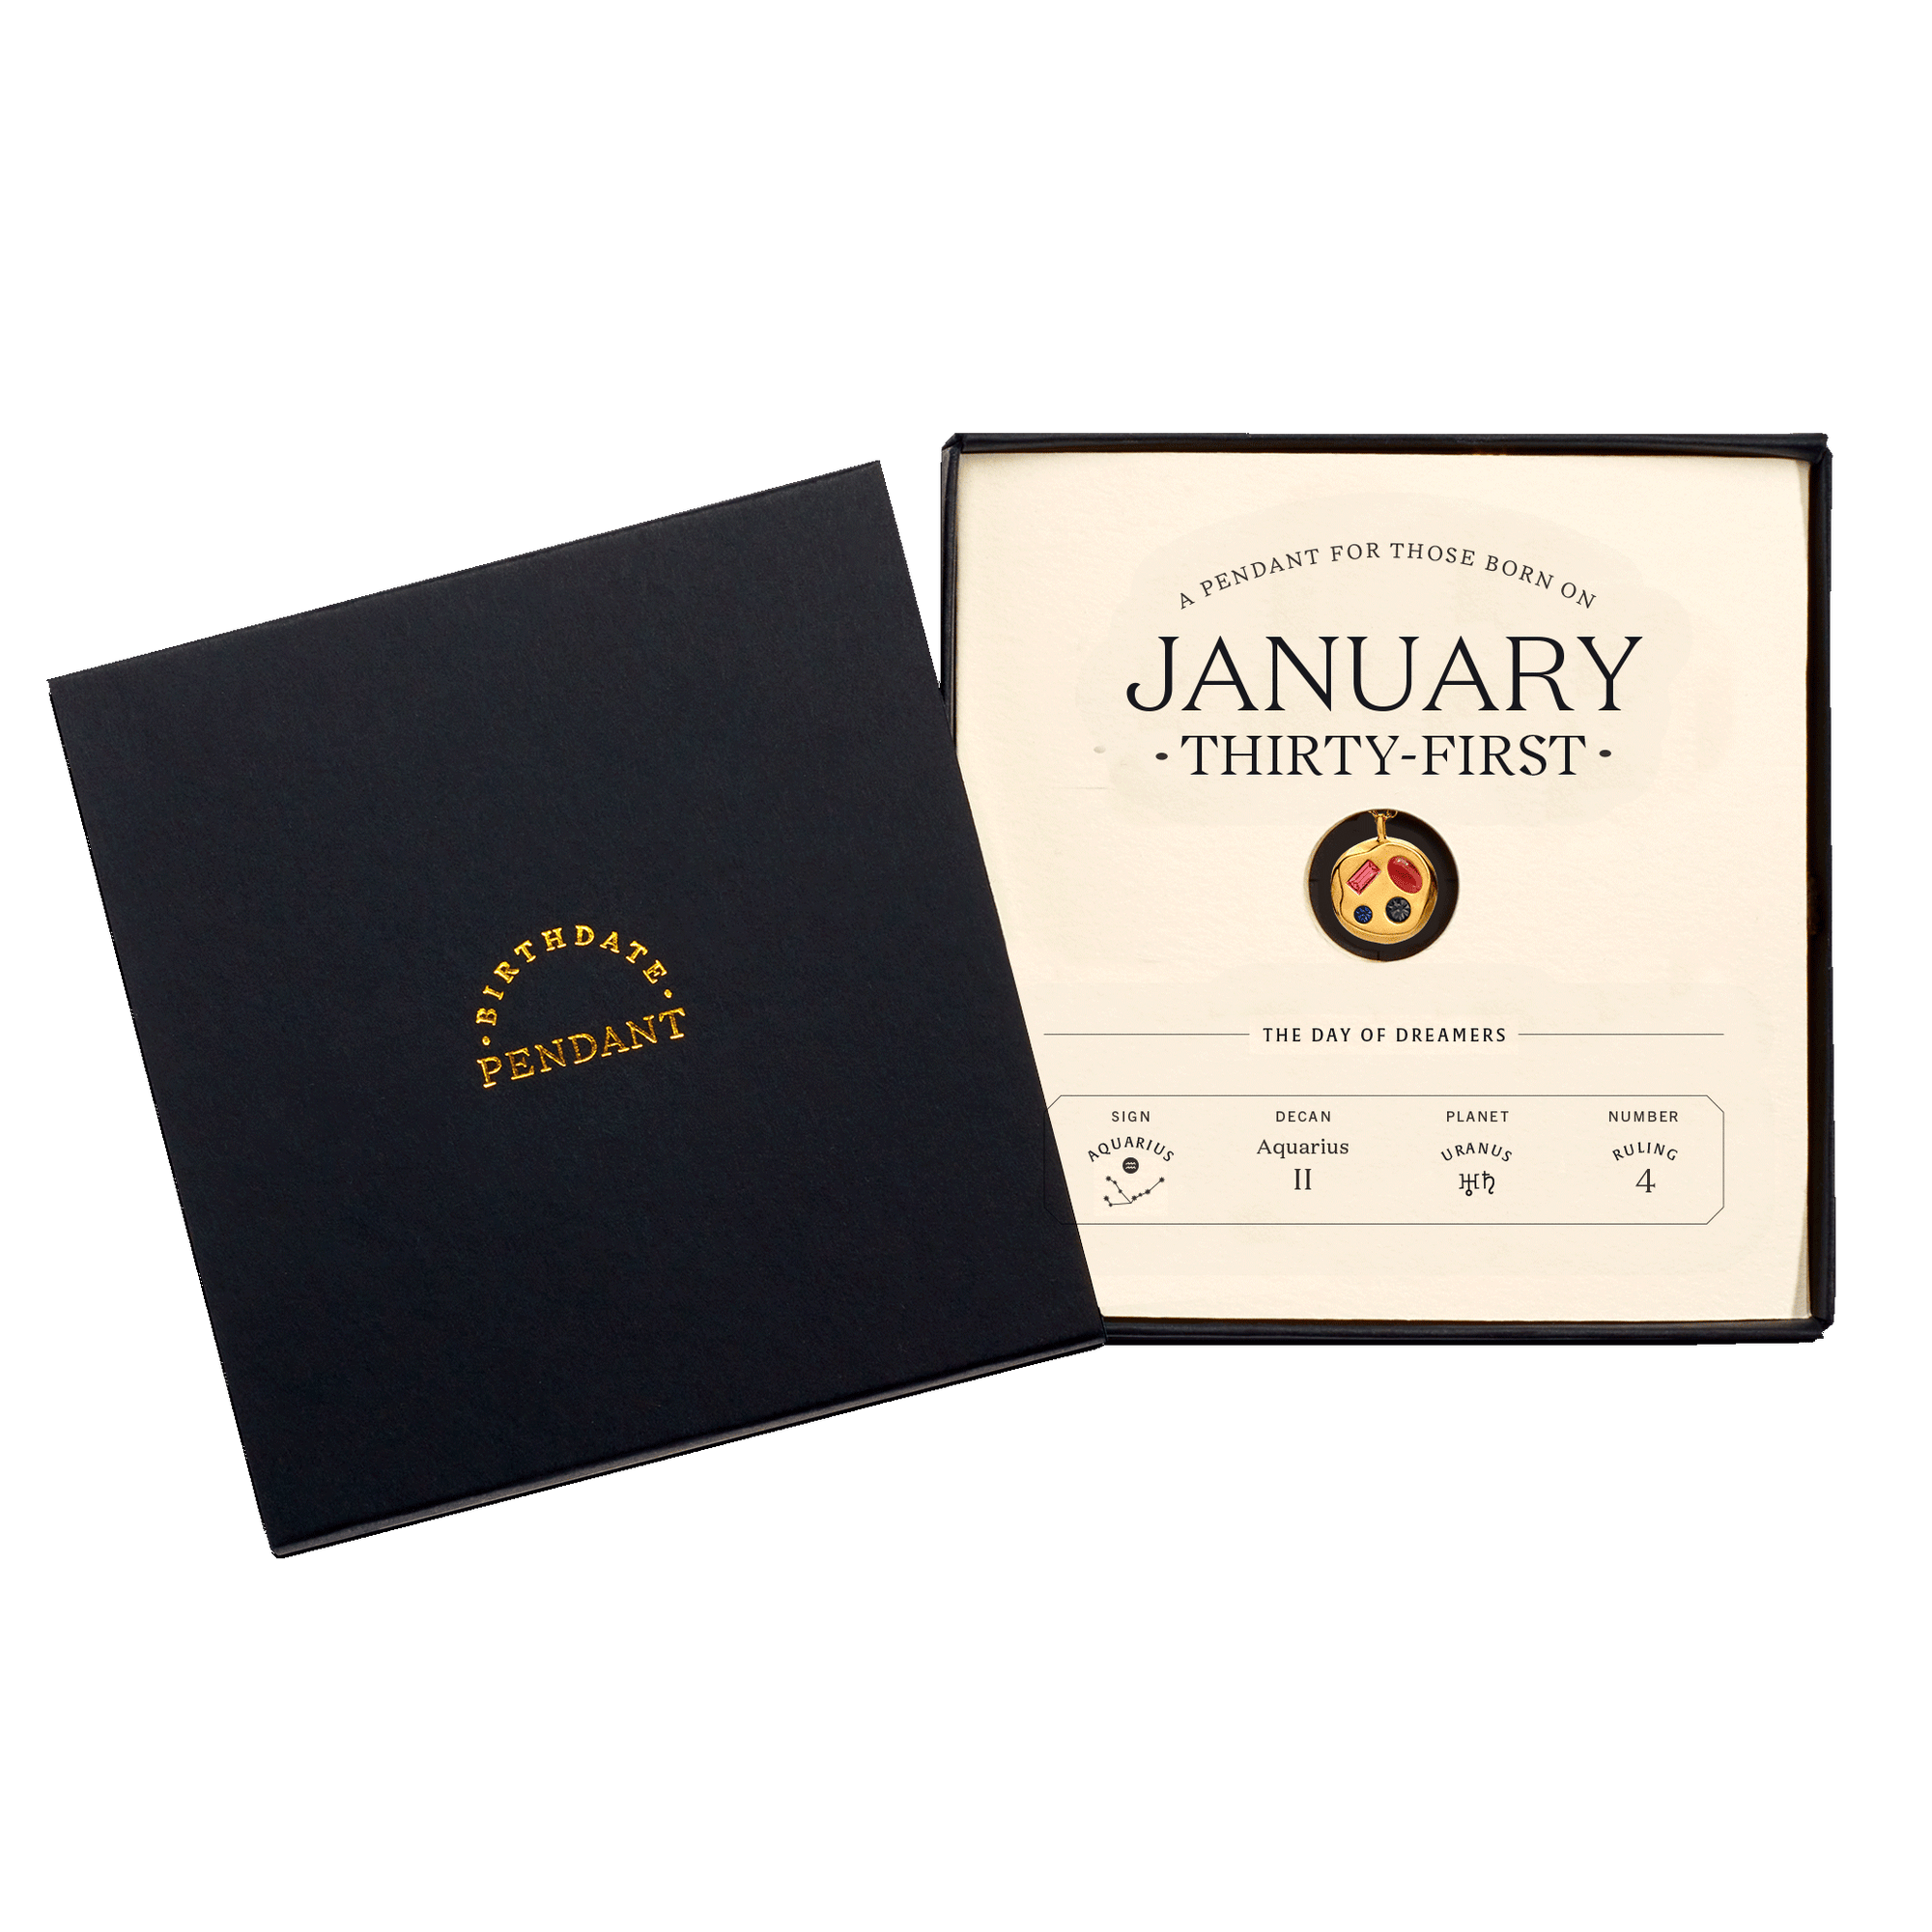 The January Thirty-First Pendant inside its box